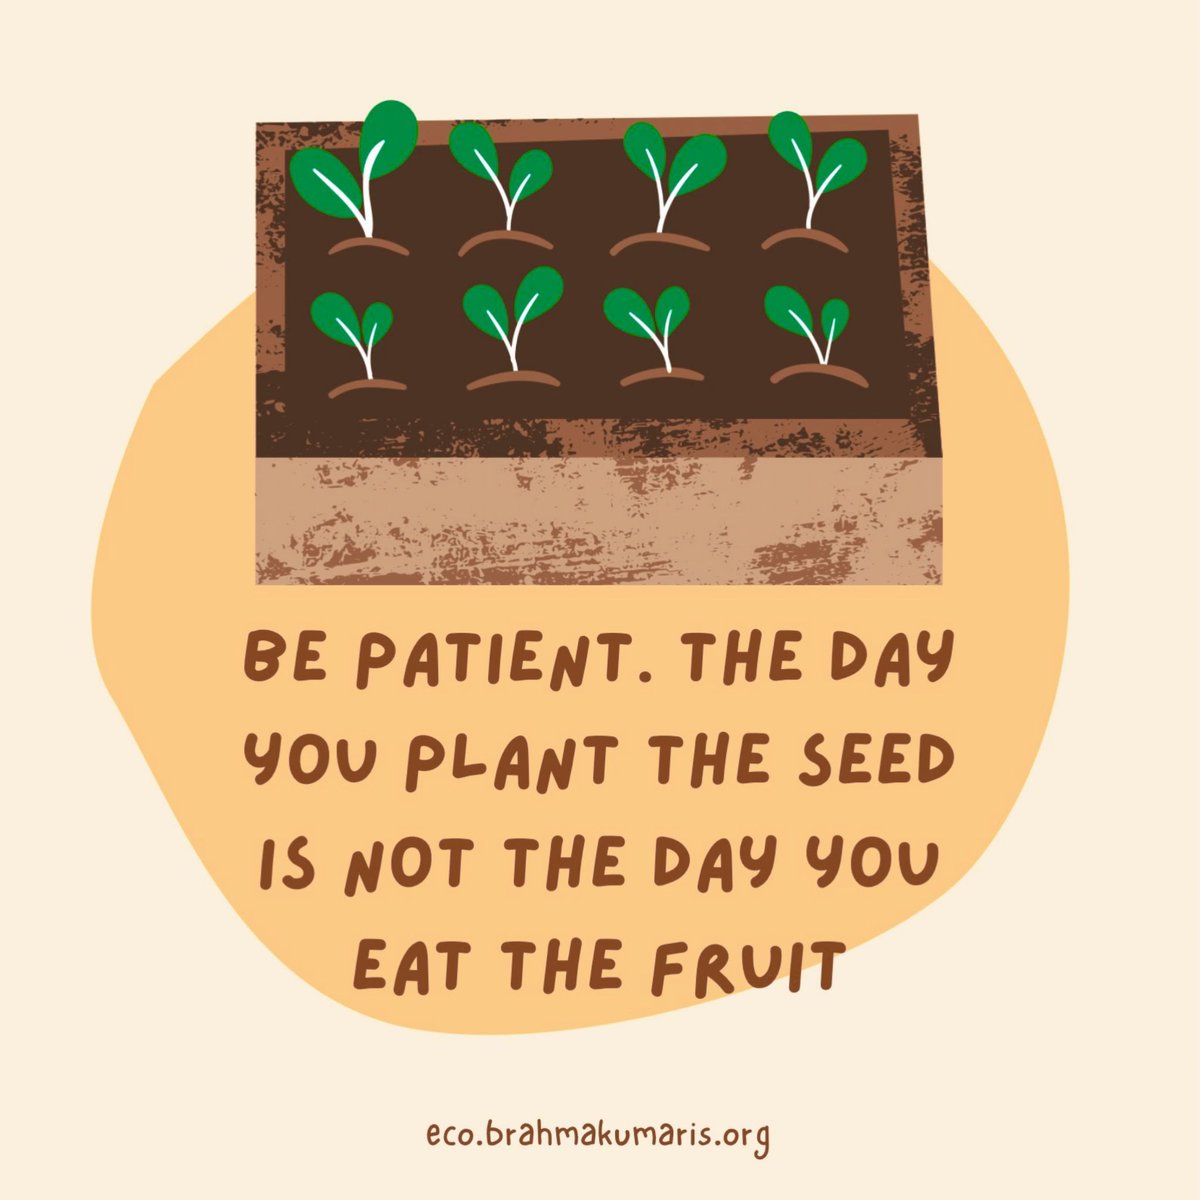 Be Patient. The day you plant the seed is not the day you eat the fruit. #ClimateAction #EarthDay #environment #ecobrahmakumaris